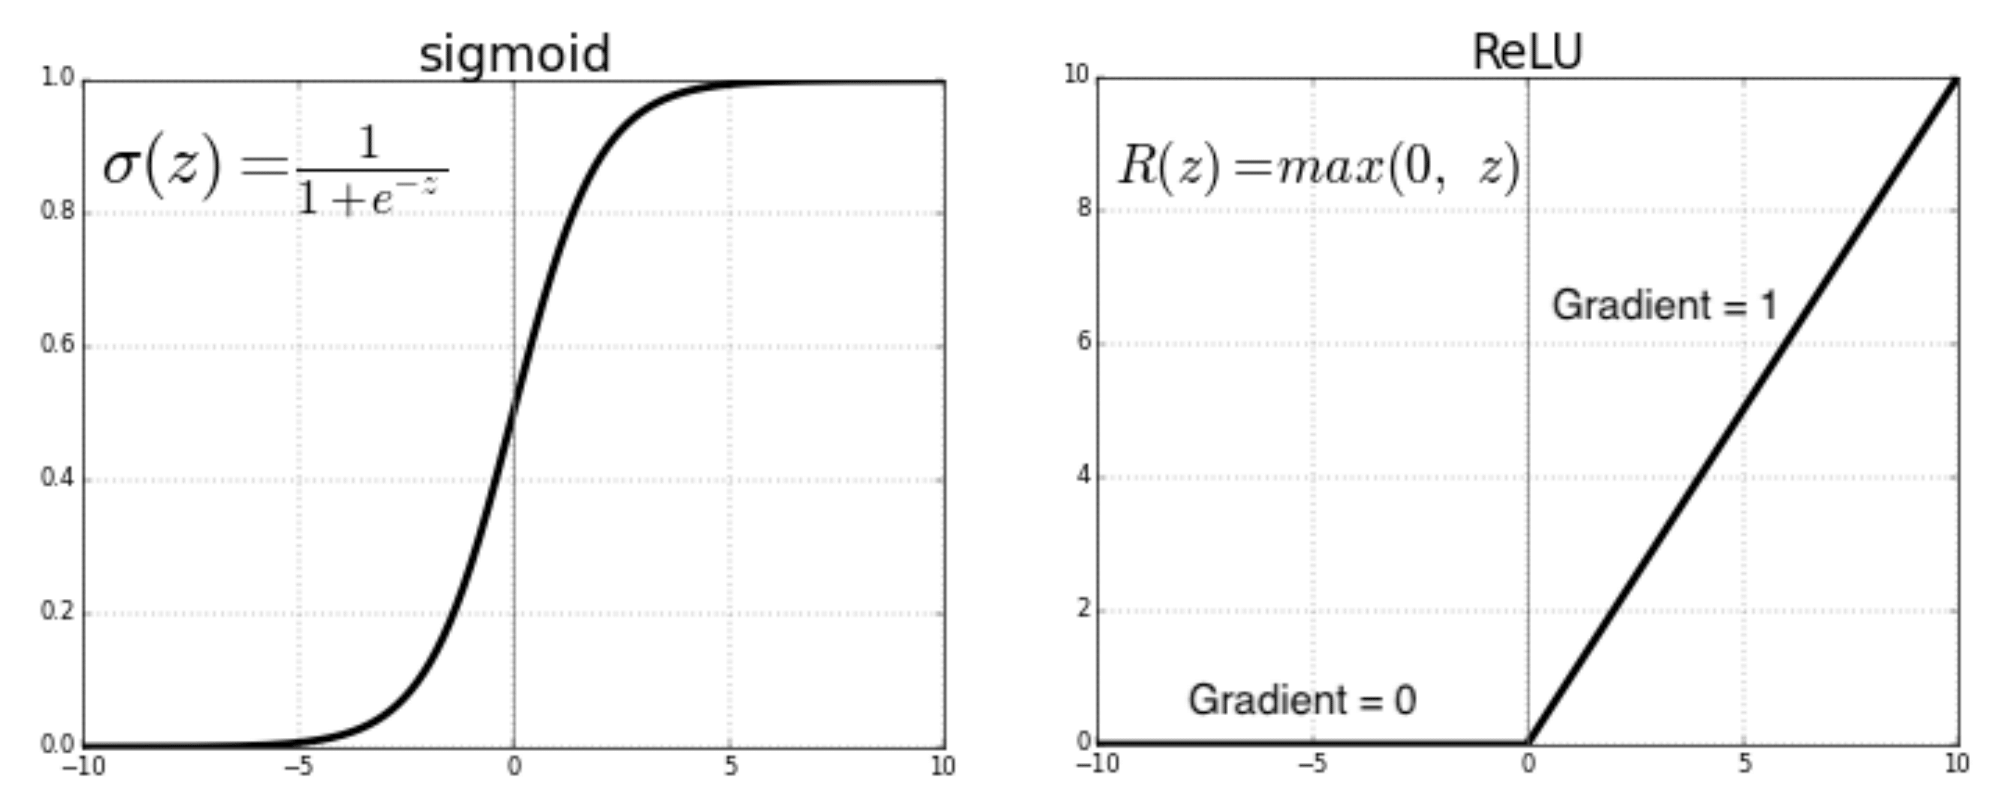 Comparison between saturating and non-saturating activation function 